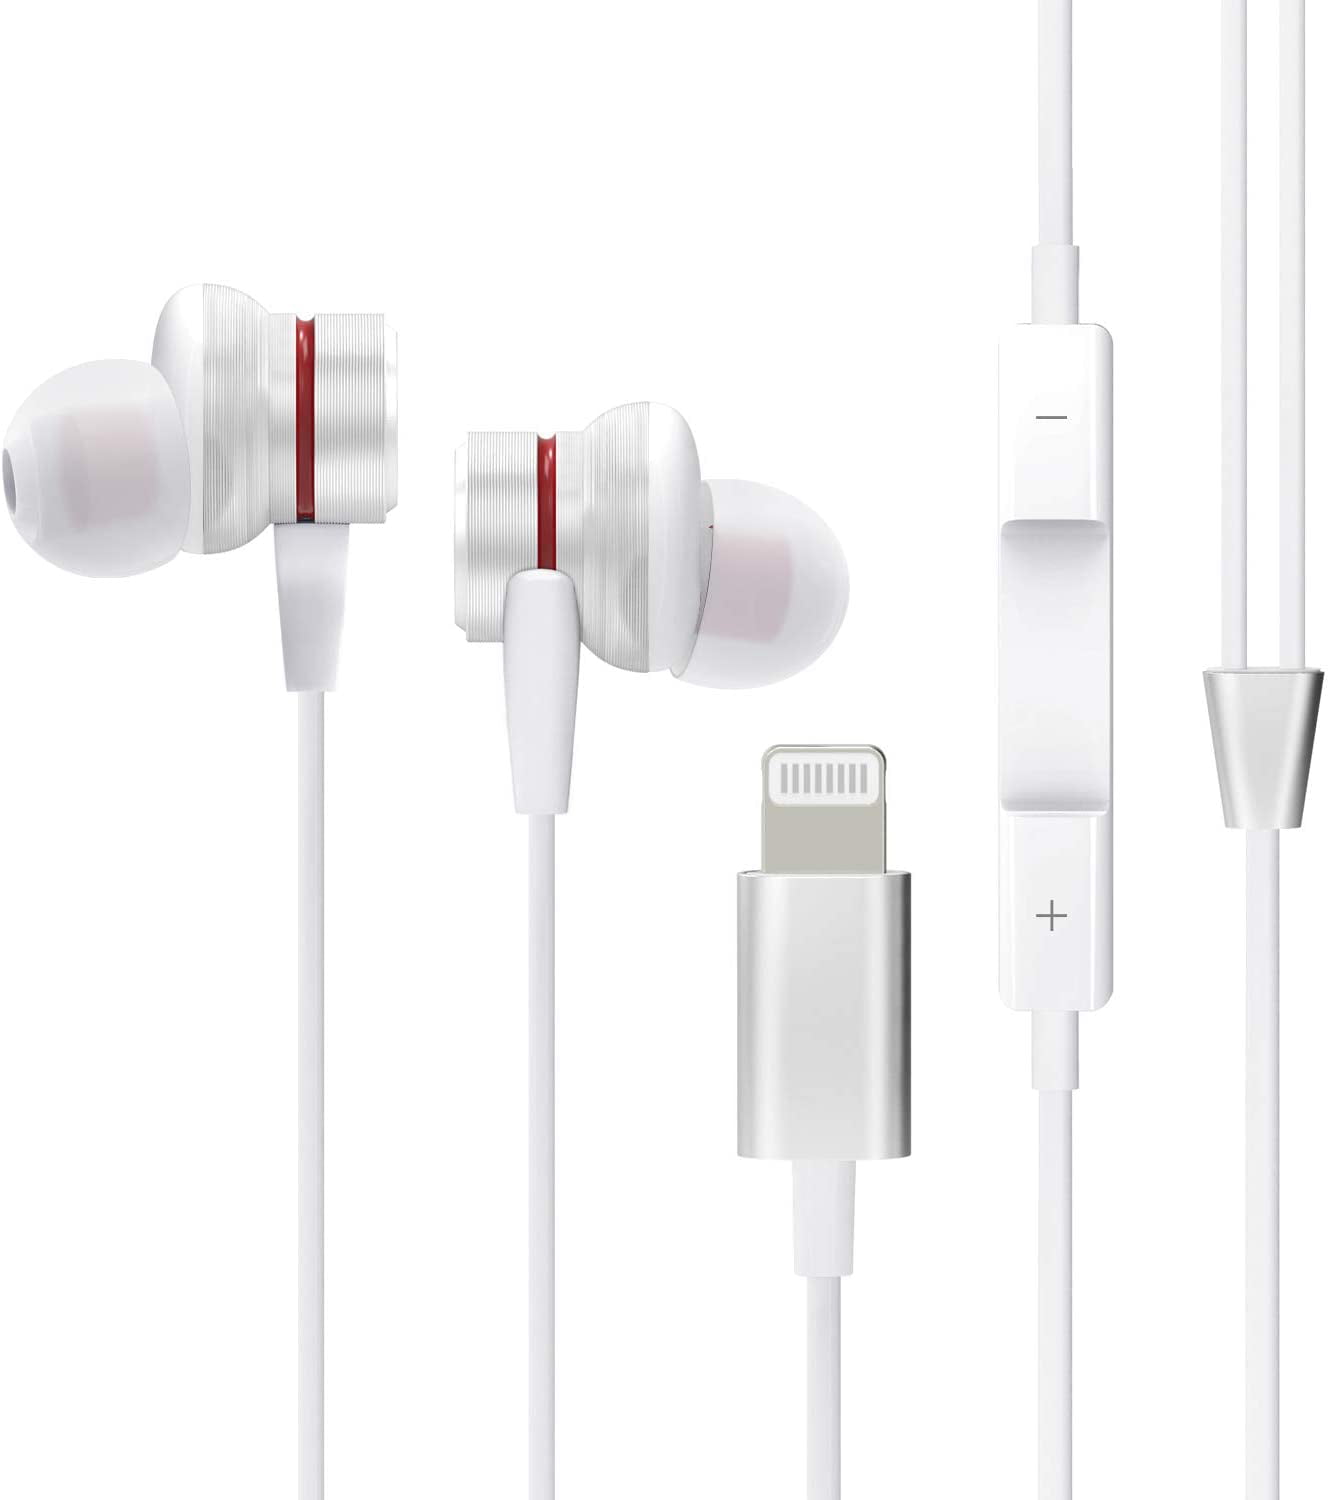 Lighting Earphones Connector,【Bluetooth Pop-up Pair】 Earbuds Headphones Noise Isolating Headset Support Call Volume Control Compatible with iPhone 7/7 Plus/8/8 Plus/X 10/XS Max/XR for iOS 12 